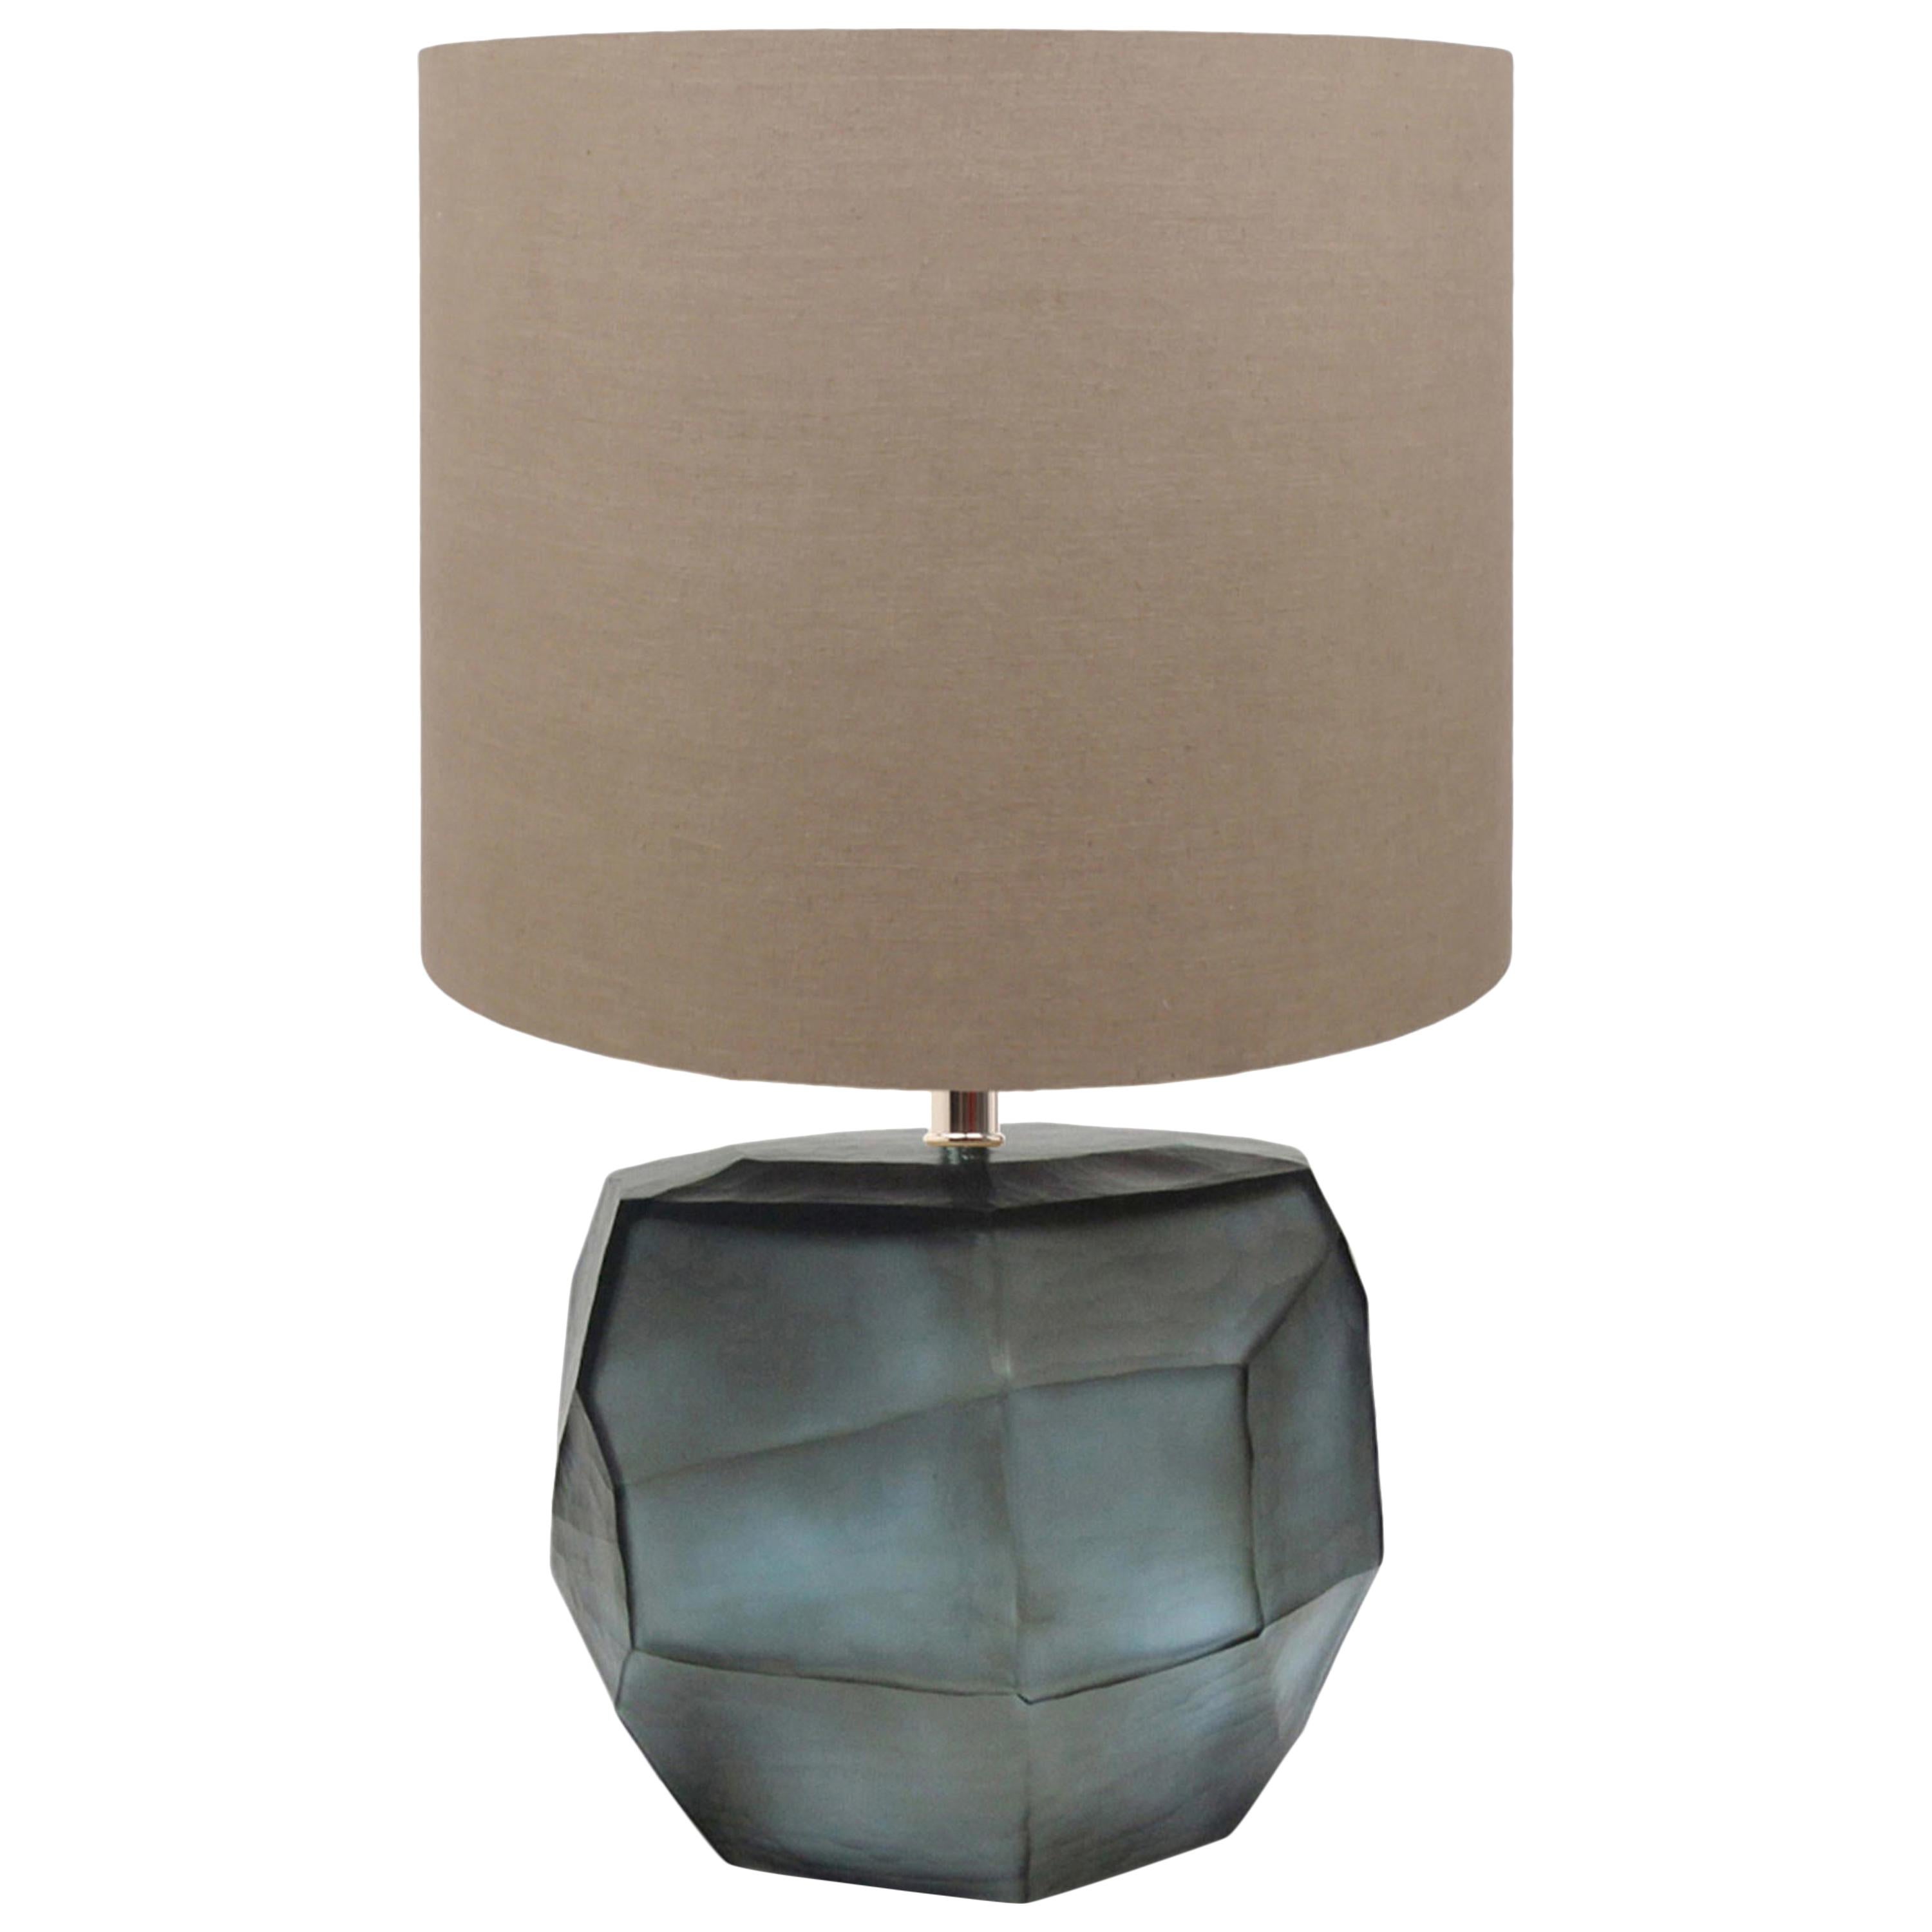 Table lamp cubistic round ocean blue / indigo by Guaxs